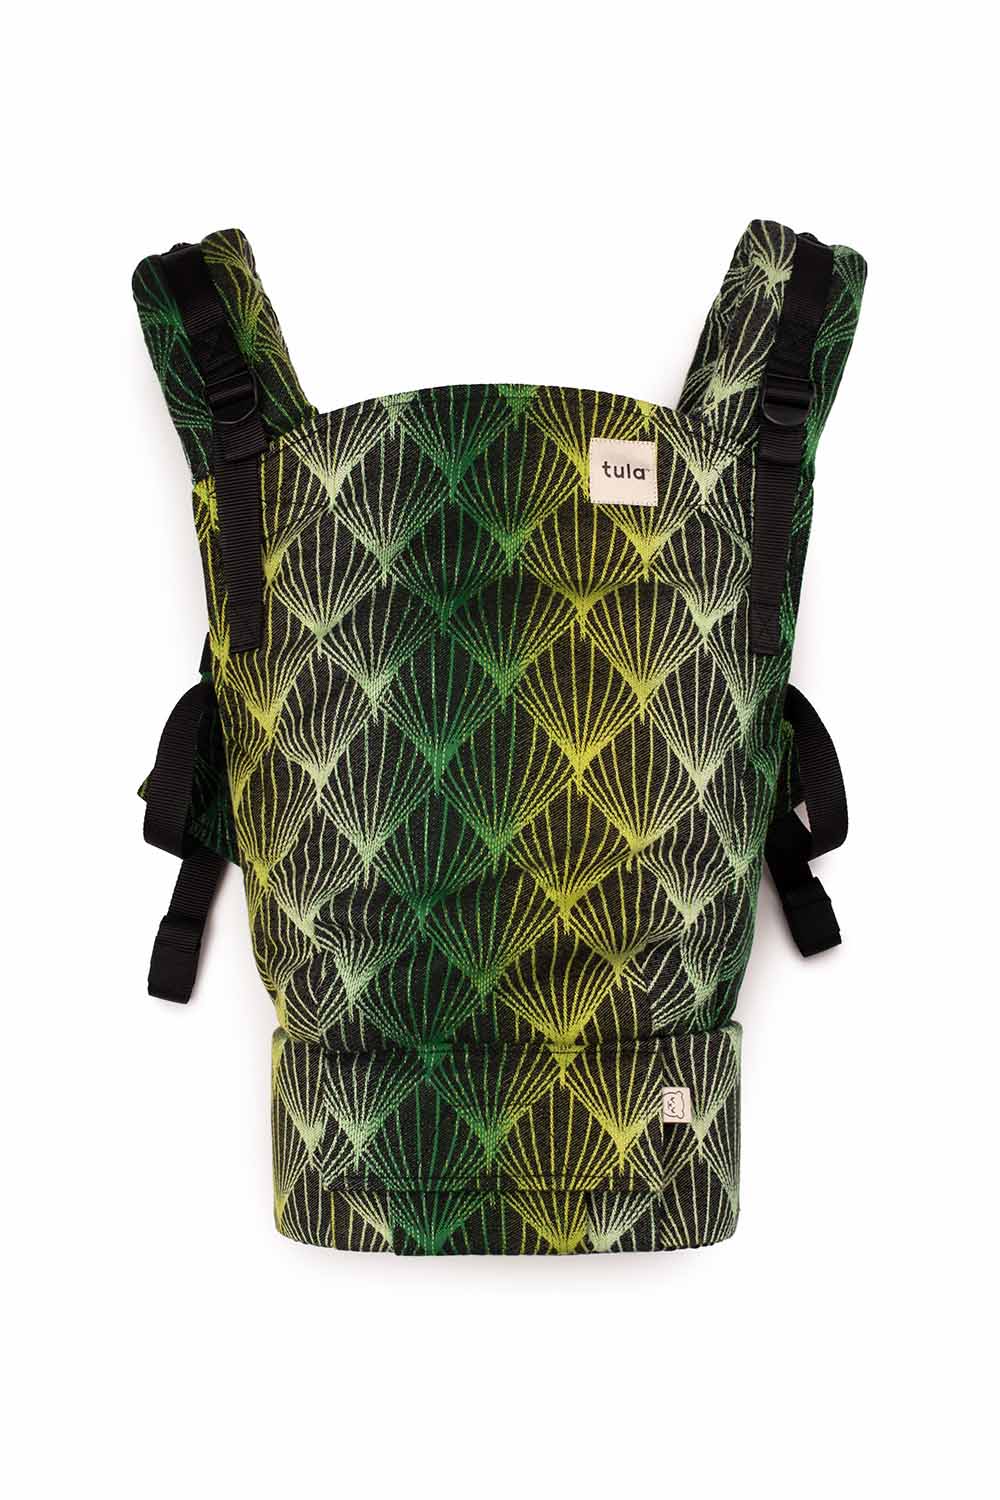 Maisa Verde - Signature Woven Free-to-Grow Baby Carrier